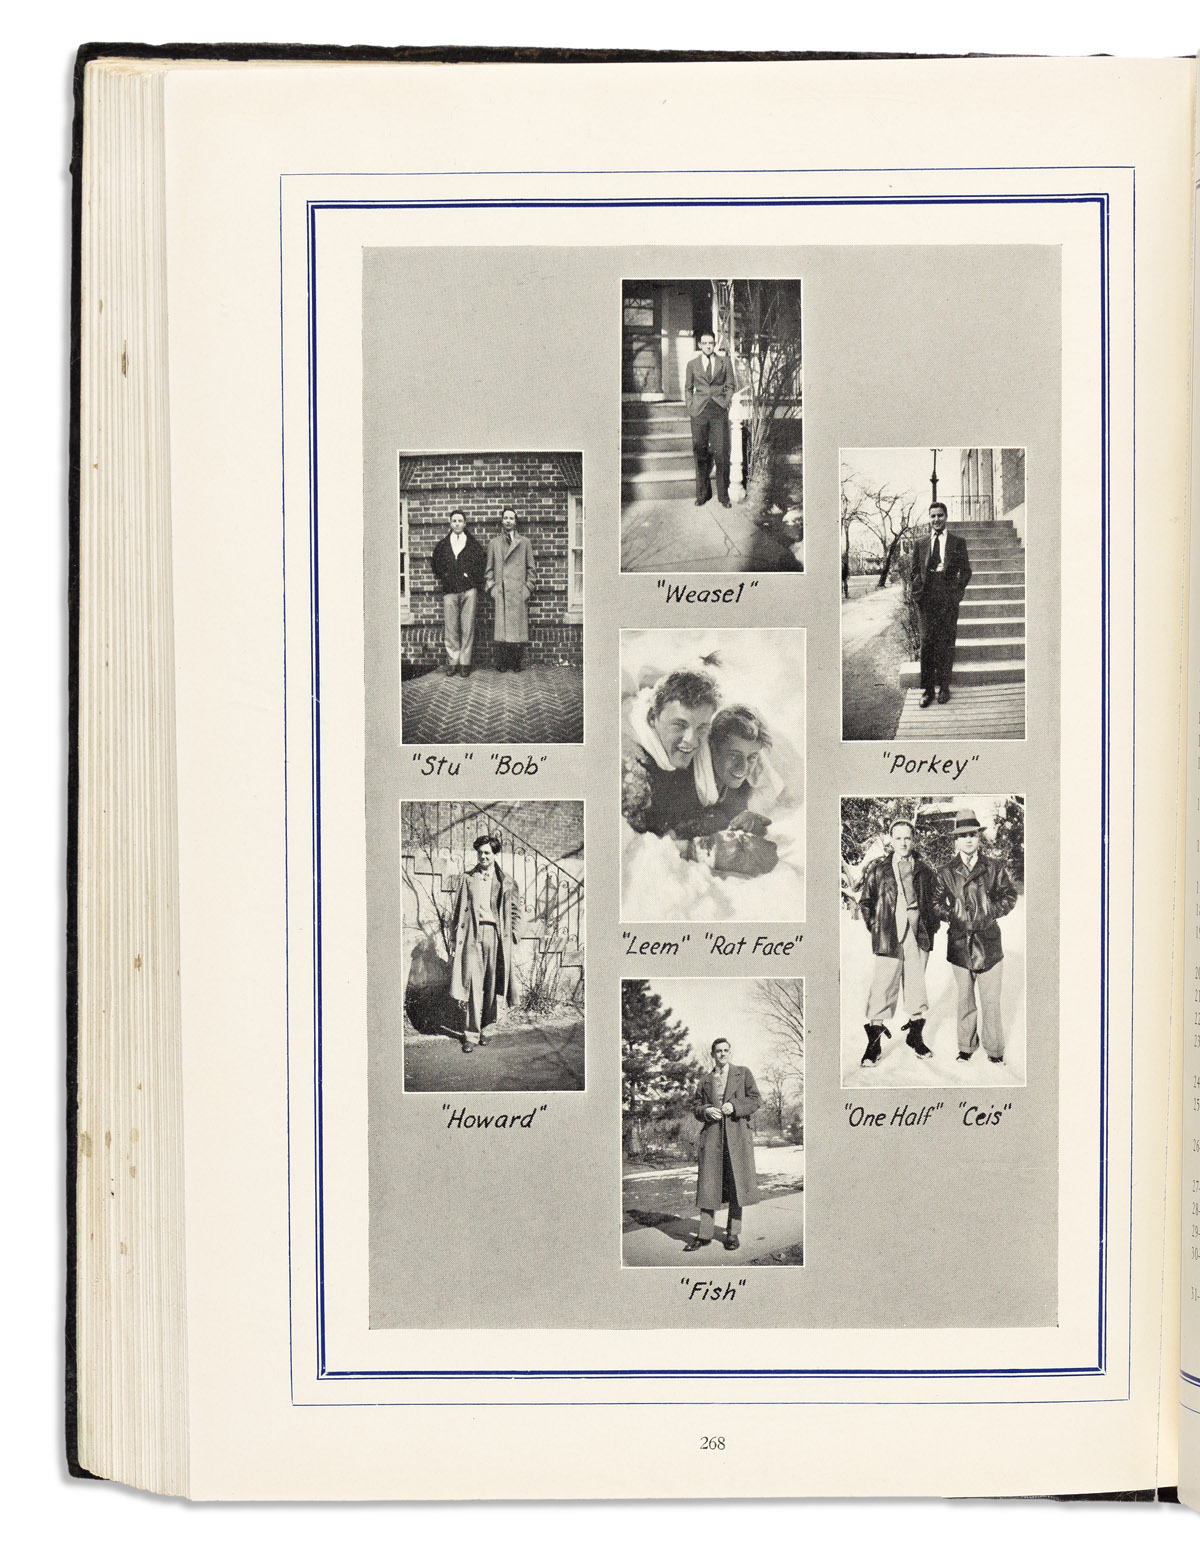 (PRESIDENTS.) Pair of yearbooks from the Choate School featuring student John F. Kennedy.